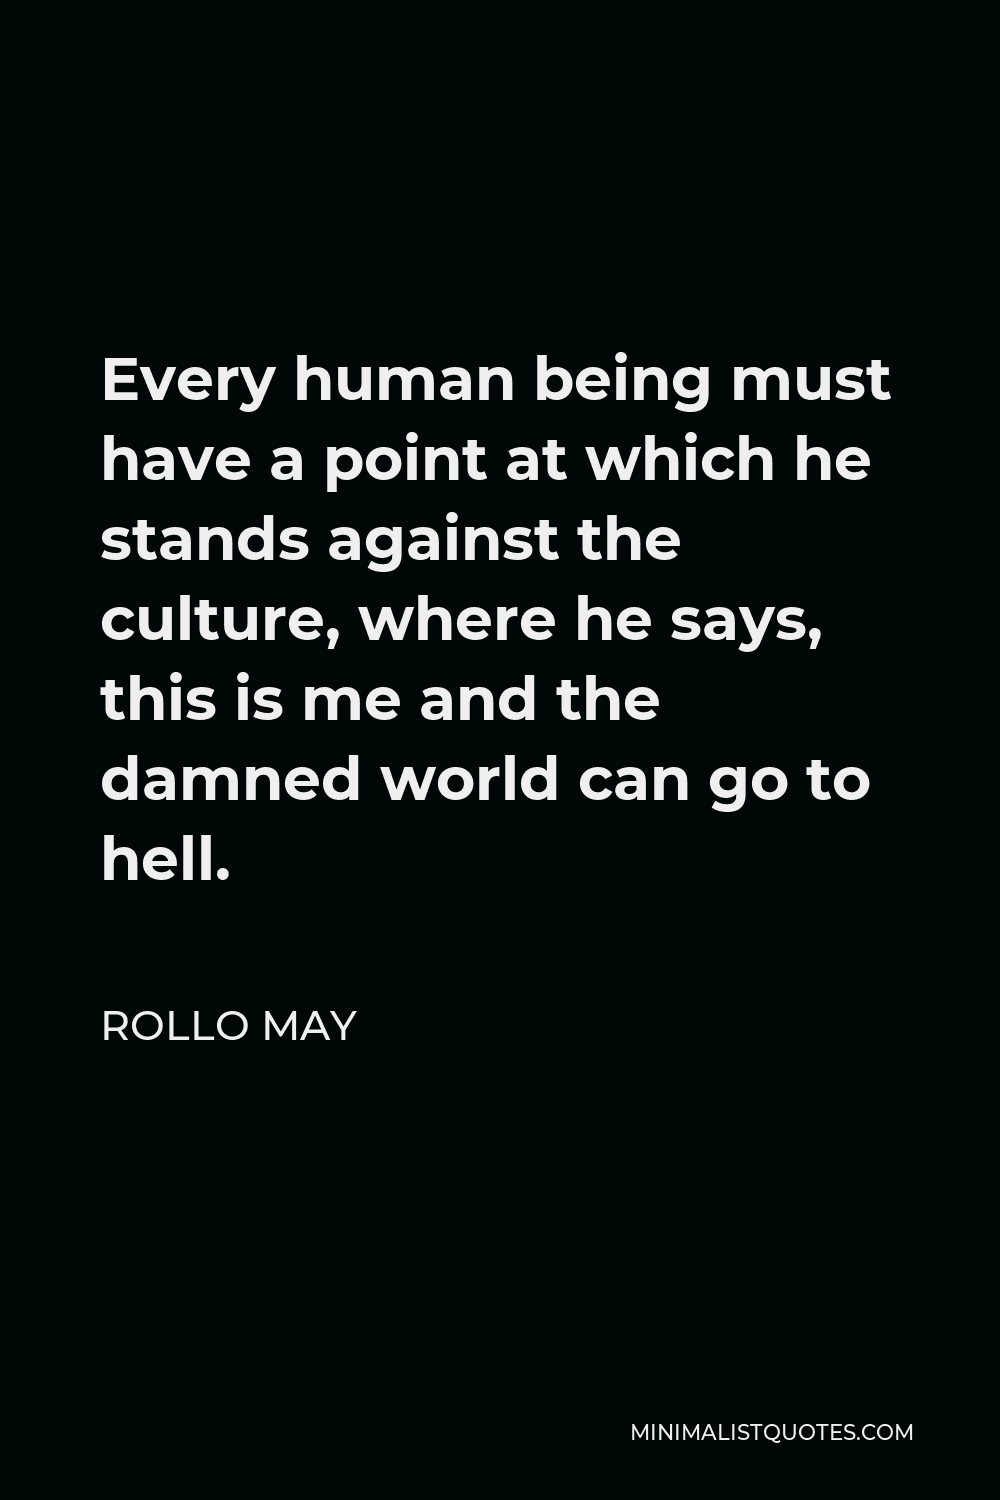 Rollo May Quote - Every human being must have a point at which he stands against the culture, where he says, “This is me and the world be damned!” Leaders have always been the ones to stand against the society – Socrates, Christ, Freud, all the way down the line.